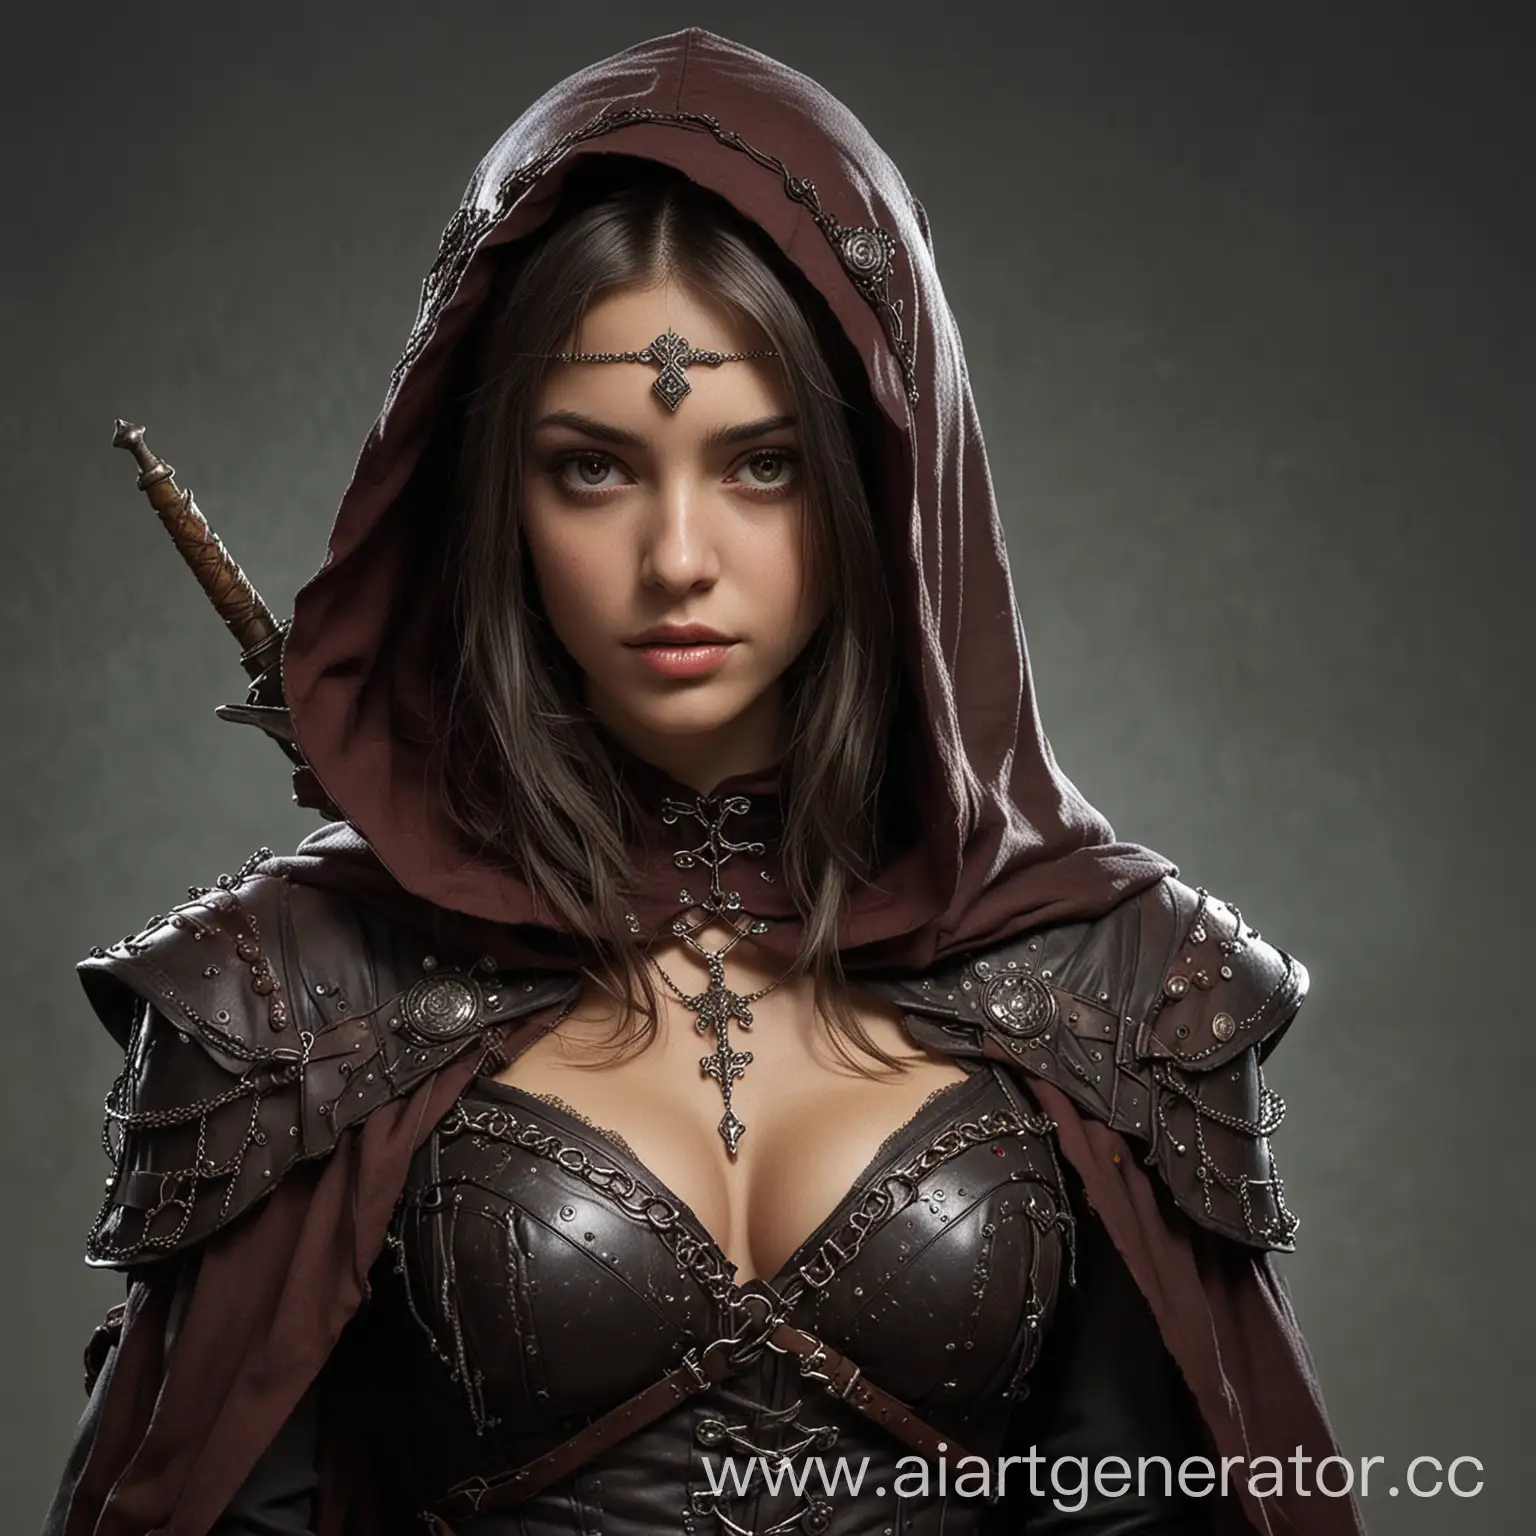 Young-Woman-in-Burgundy-Cloak-and-Veil-with-Decorative-Chain-and-Leather-Accessories